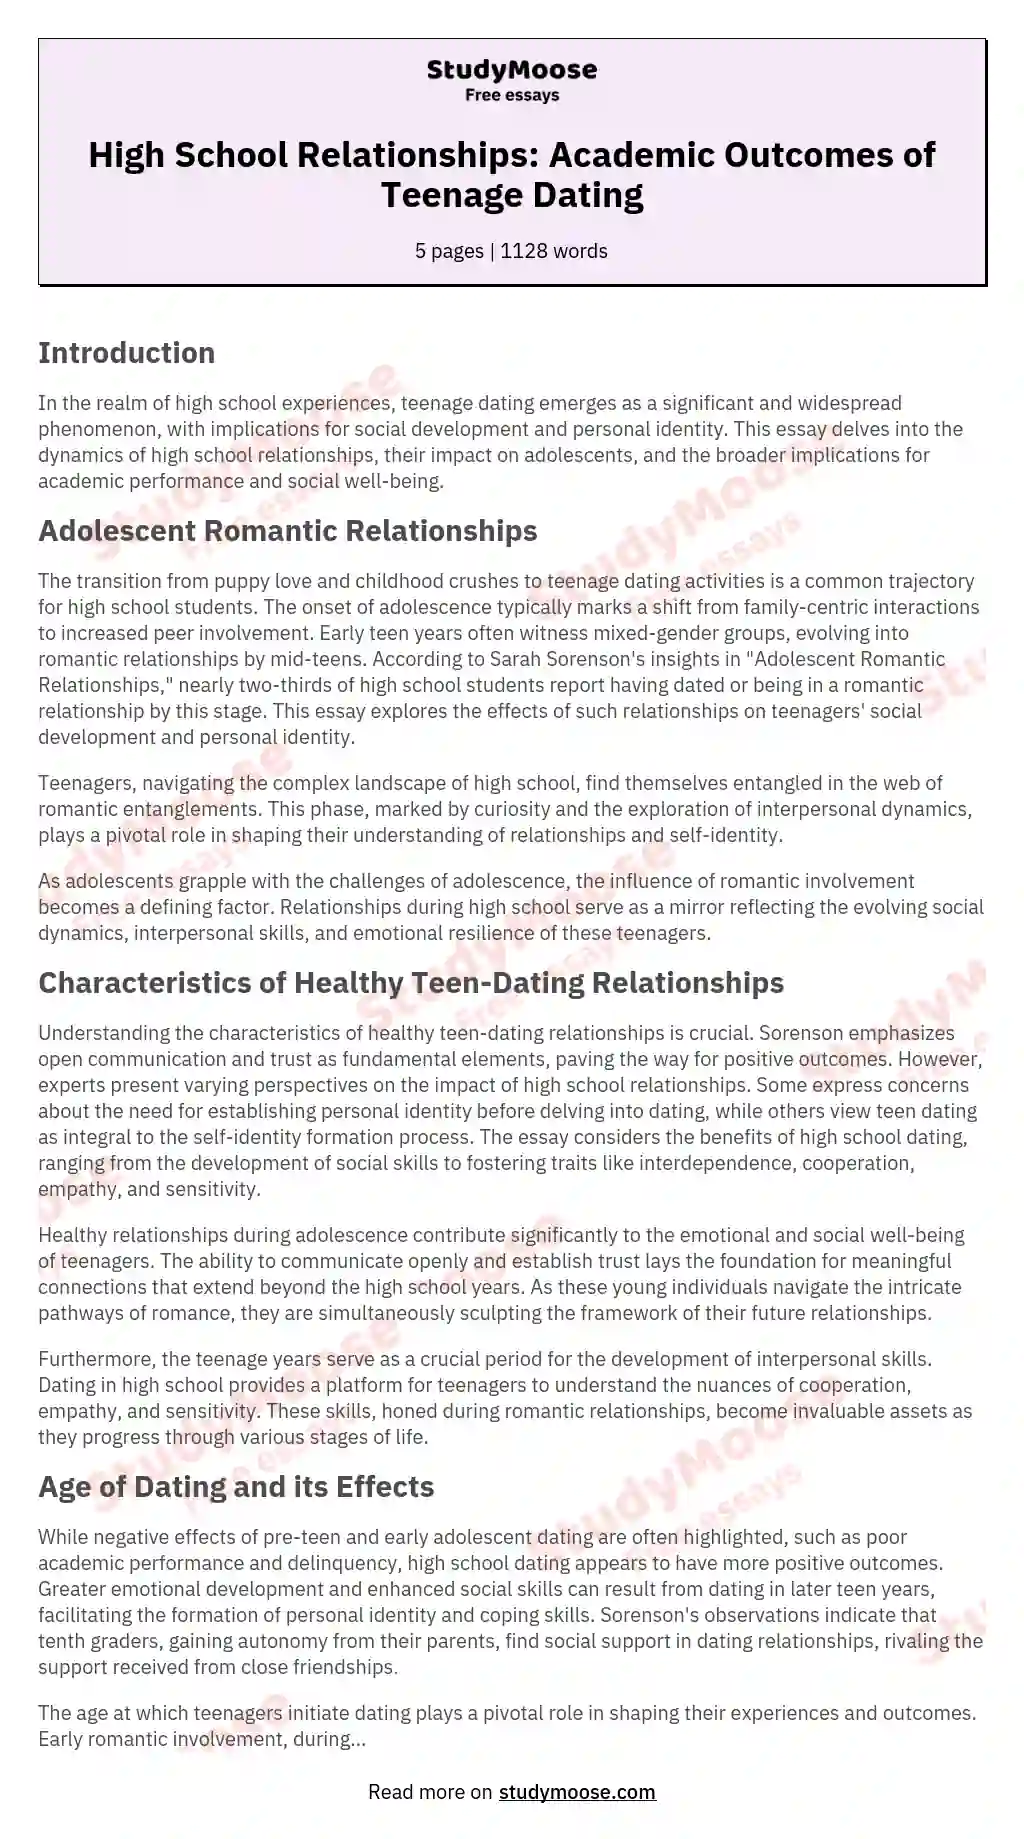 High School Relationships: Academic Outcomes of Teenage Dating essay